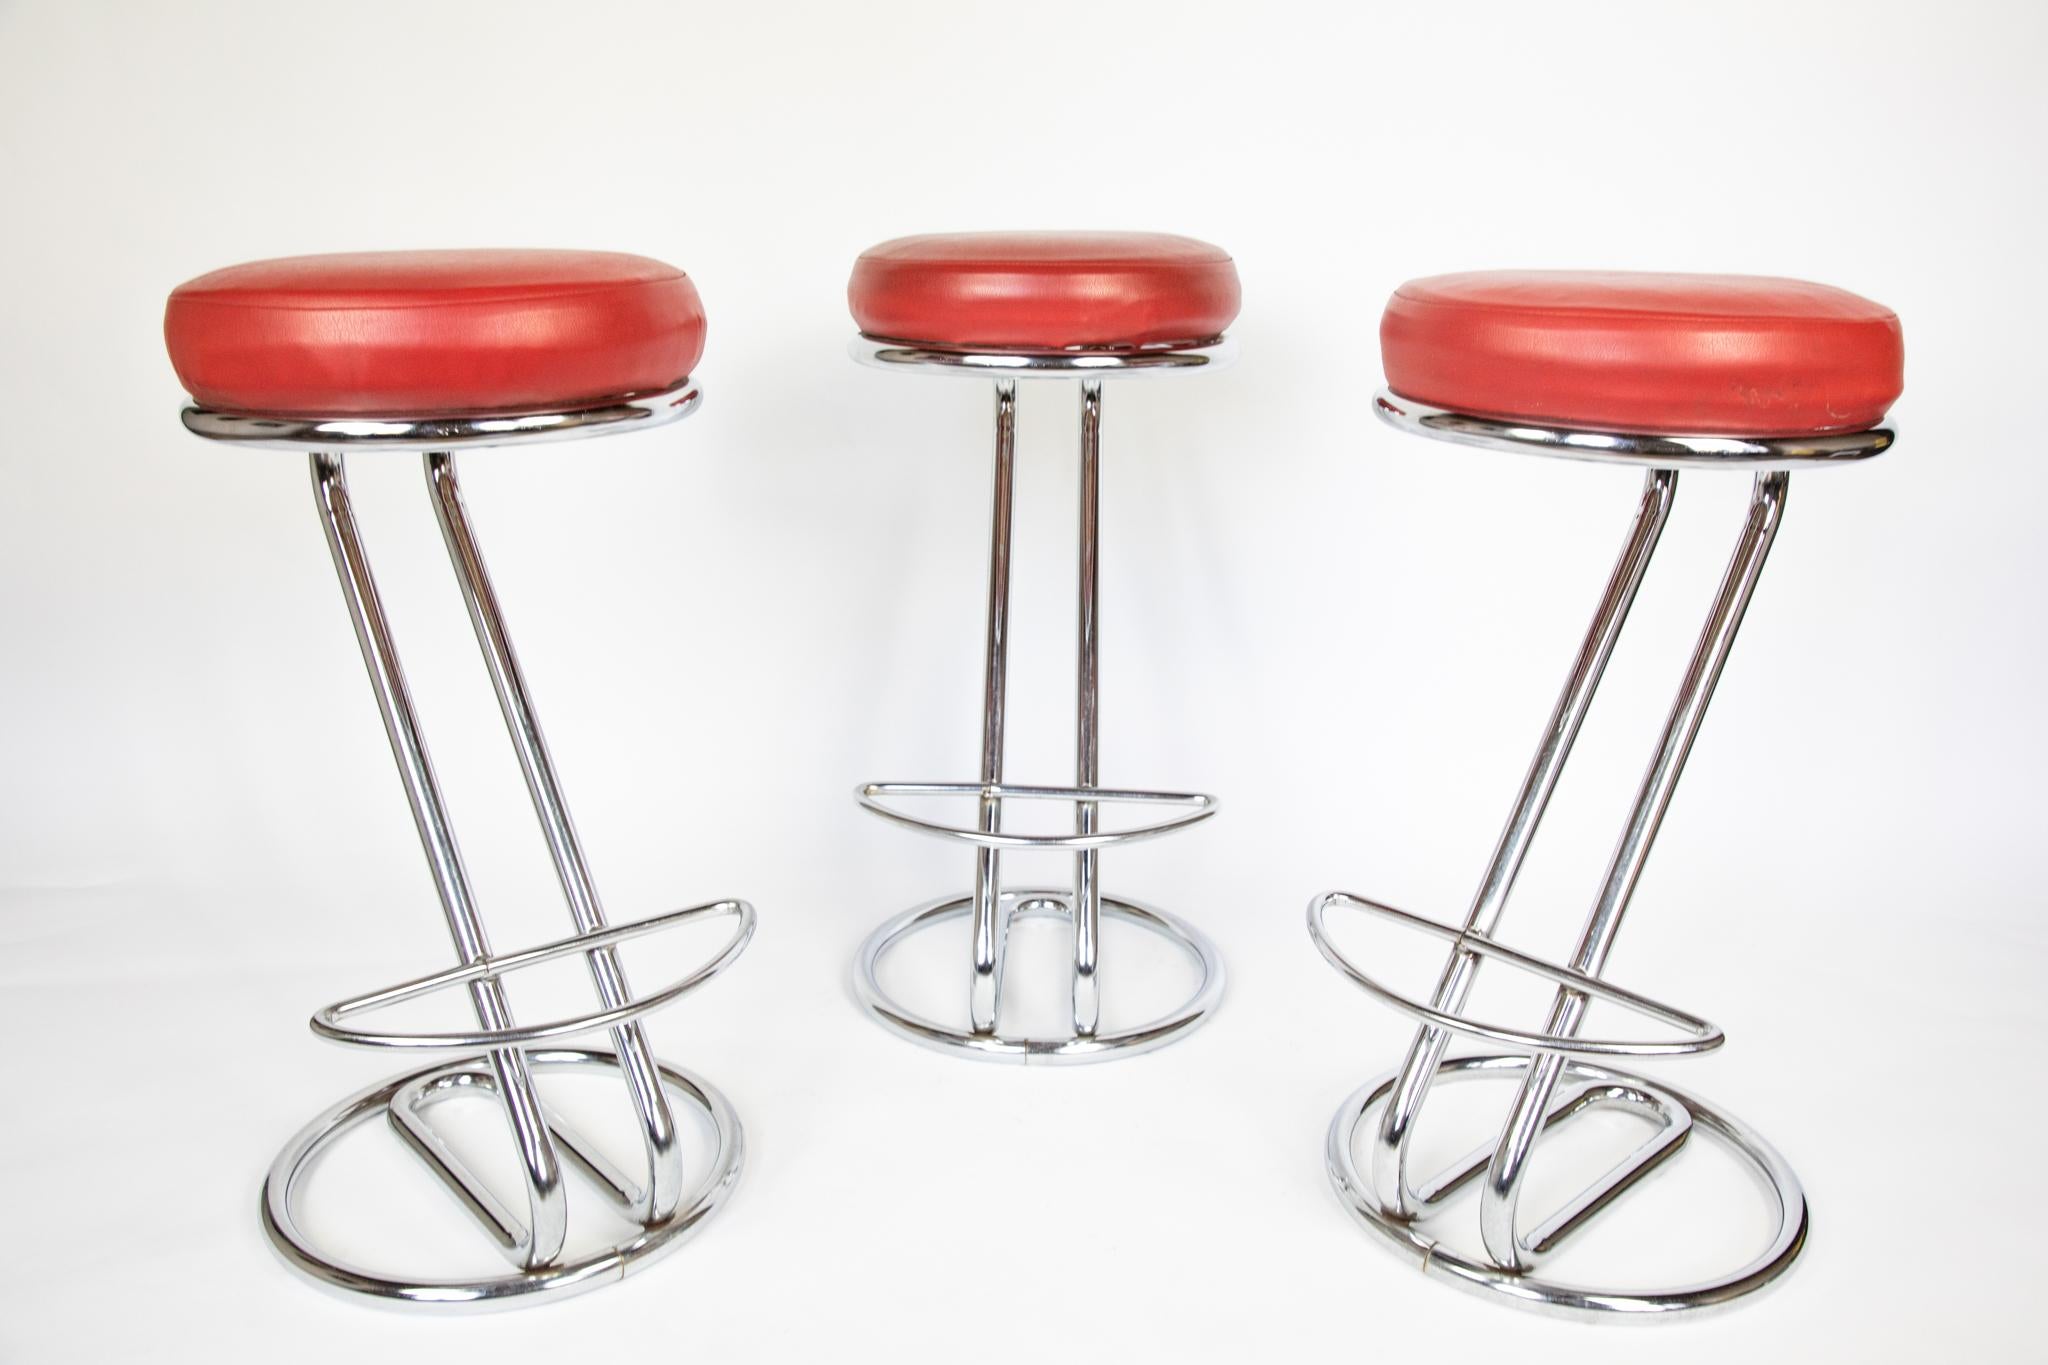 Polished Mid Century Modern  Diner Bar Stools Red Faux Leather, Chrome, Italy, 1950s